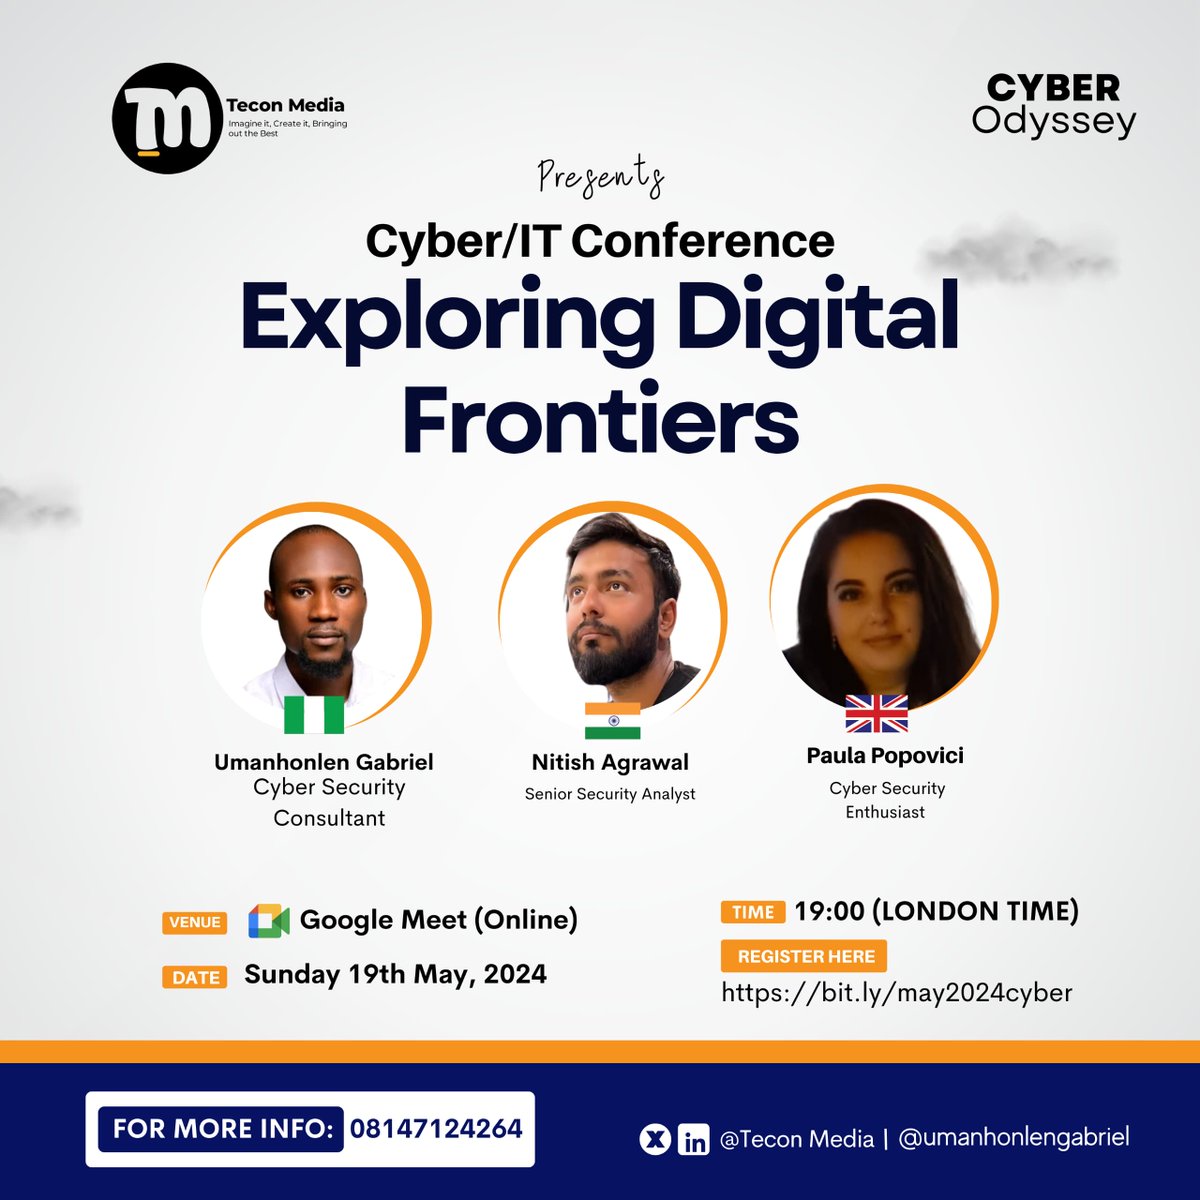 Join us in this immersive online event dedicated to cybersecurity and digital trends!

📅 Date & Time: Sunday, May 19 | 7pm

📍 Location: Online

#CyberSecurity #EVENT #informationtechnology #Career